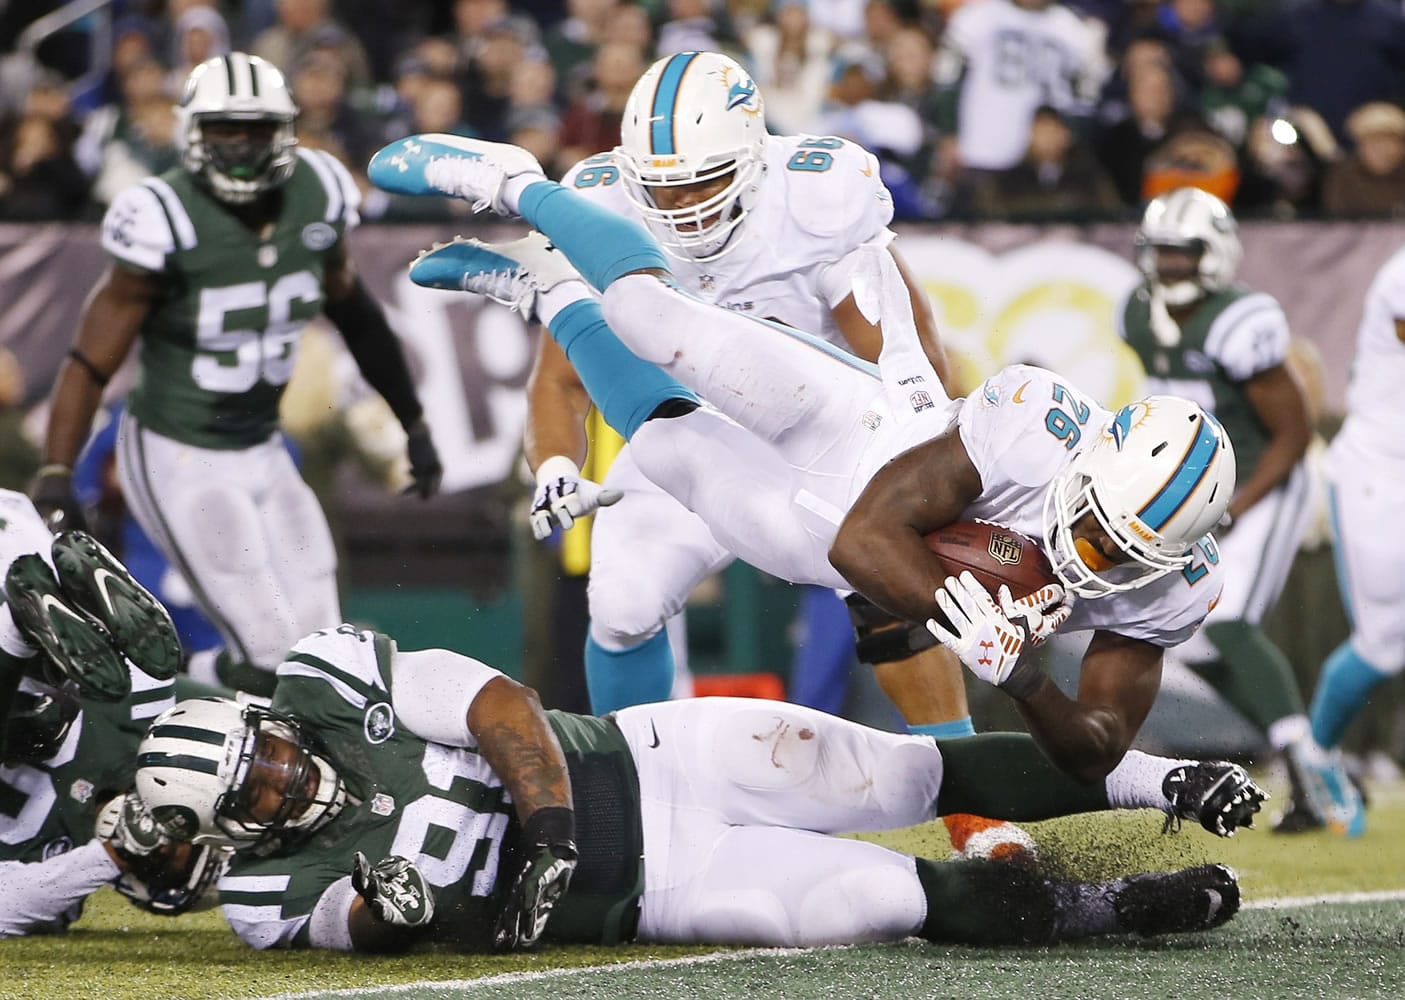 Miami Dolphins running back Lamar Miller (26) leaps over New York Jets defensive end Sheldon Richardson (91) for a touchdown during the fourth quarter Monday, Dec. 1, 2014, in East Rutherford, N.J.